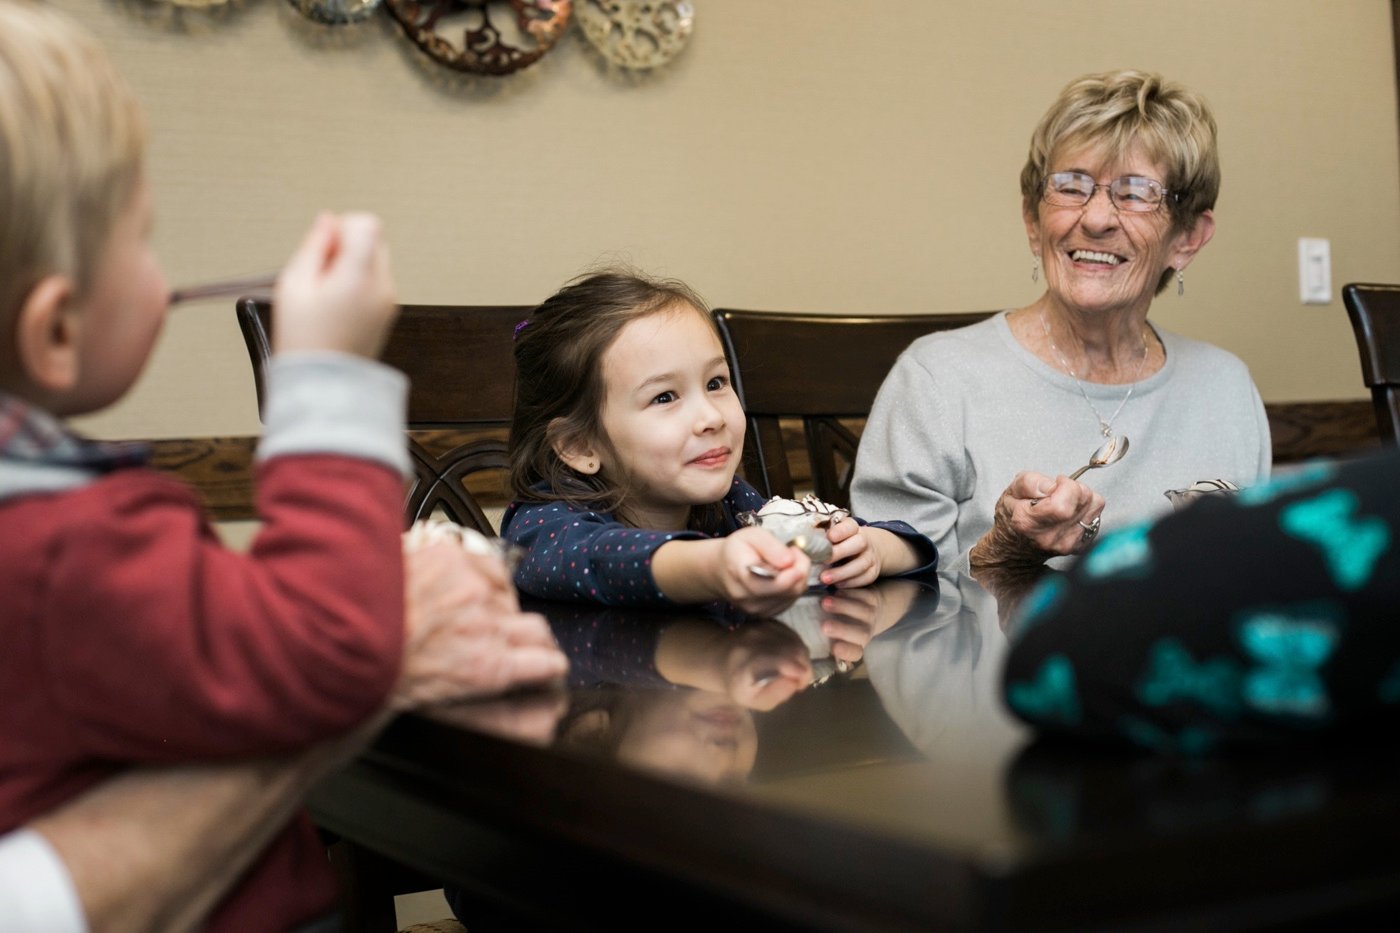 A grandmother eating ice cream with her grandchildren at a dining table